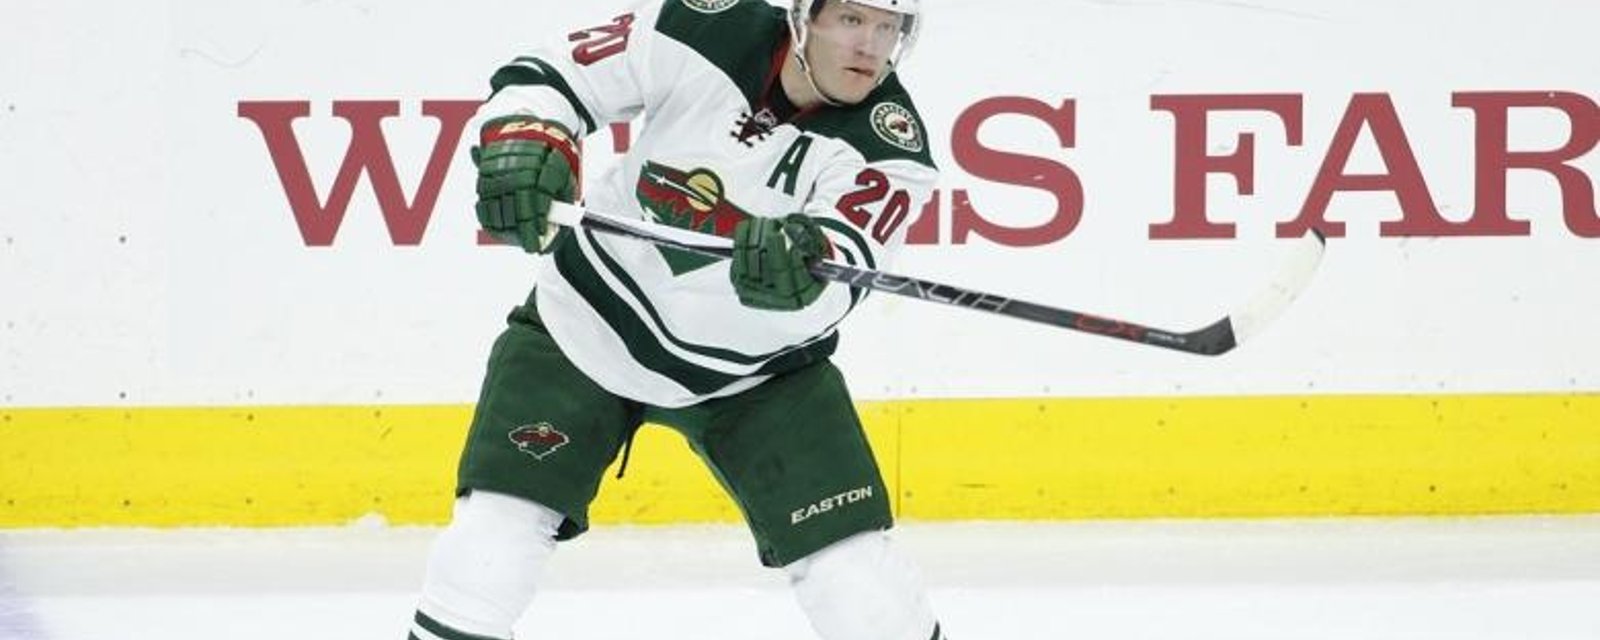 Ryan Suter sets franchise record in huge win.